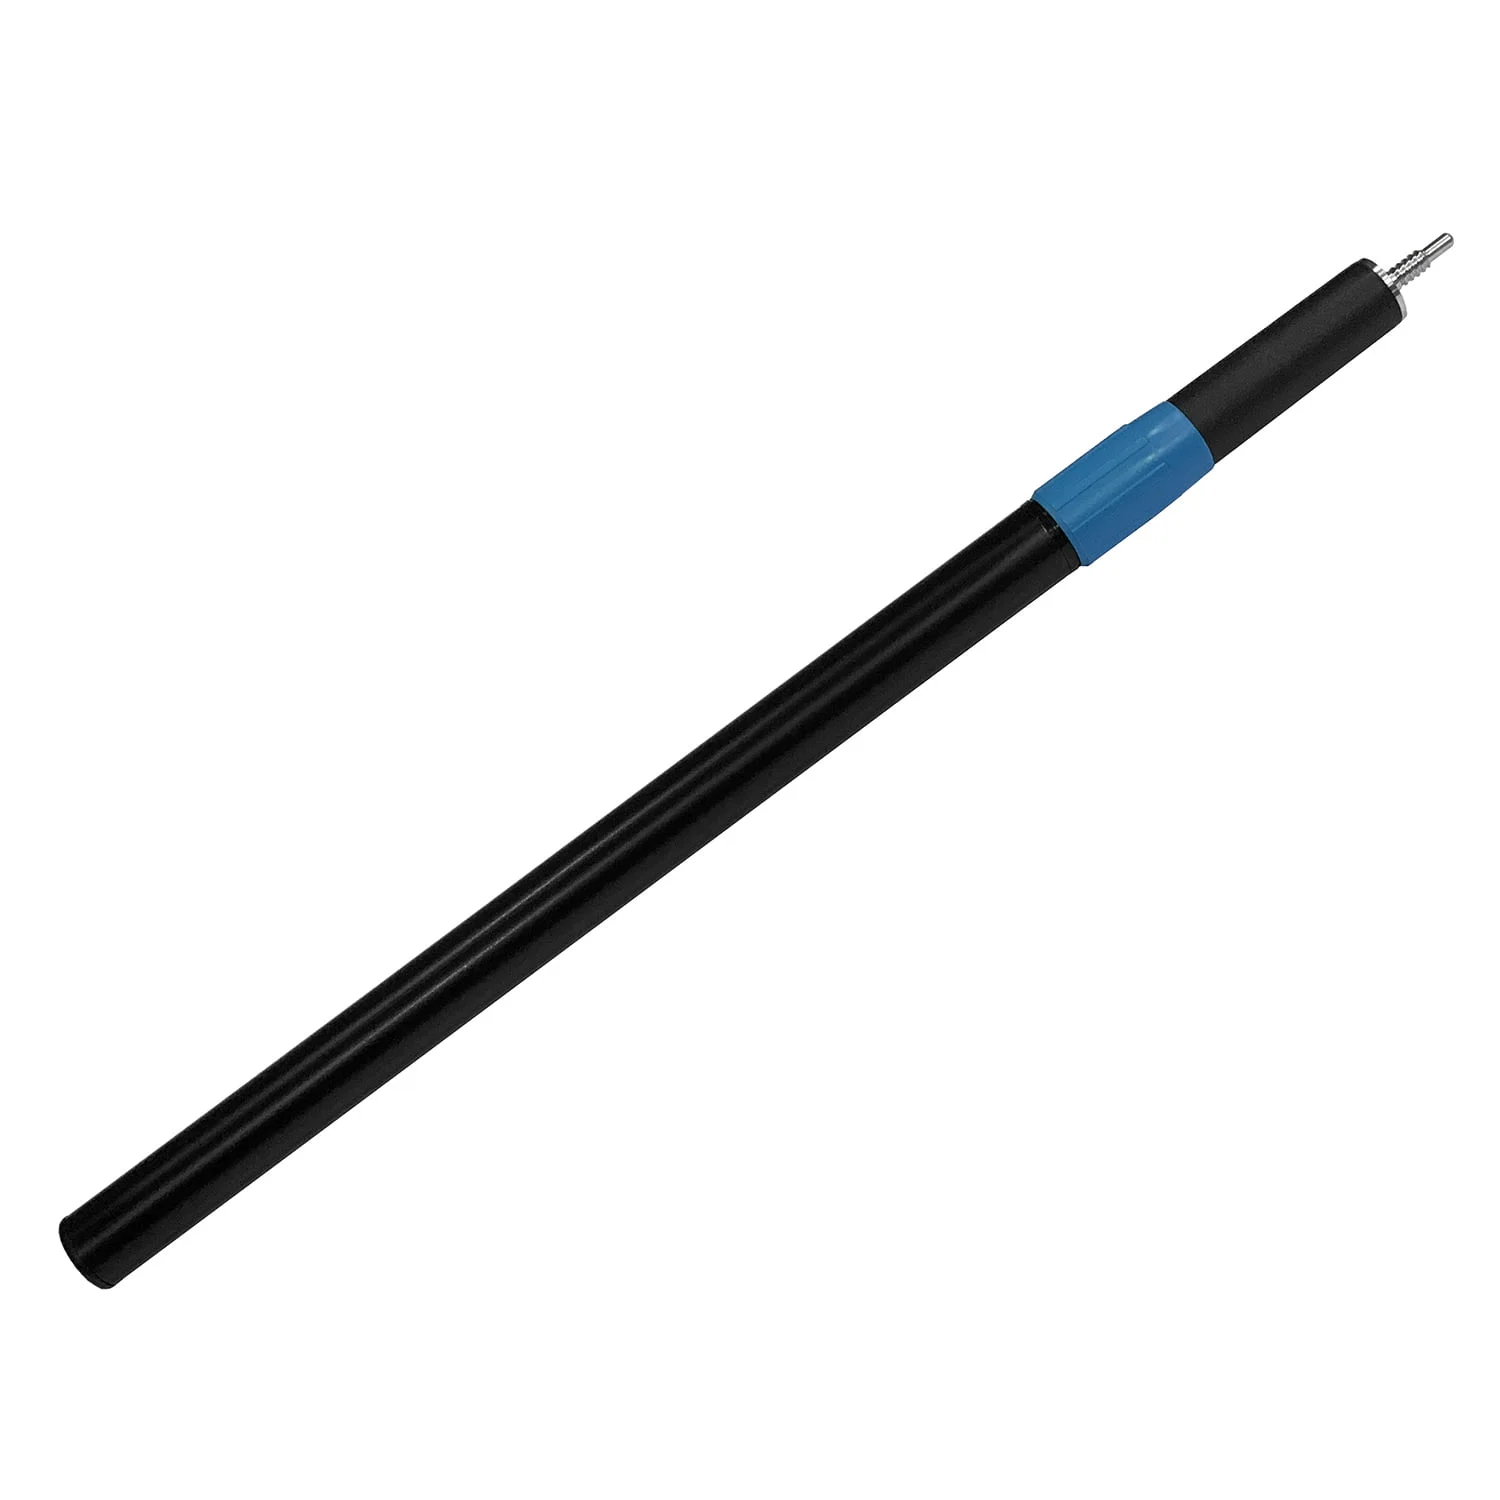 Cue Craft 23 Inch Steel Joint Telescopic Extension